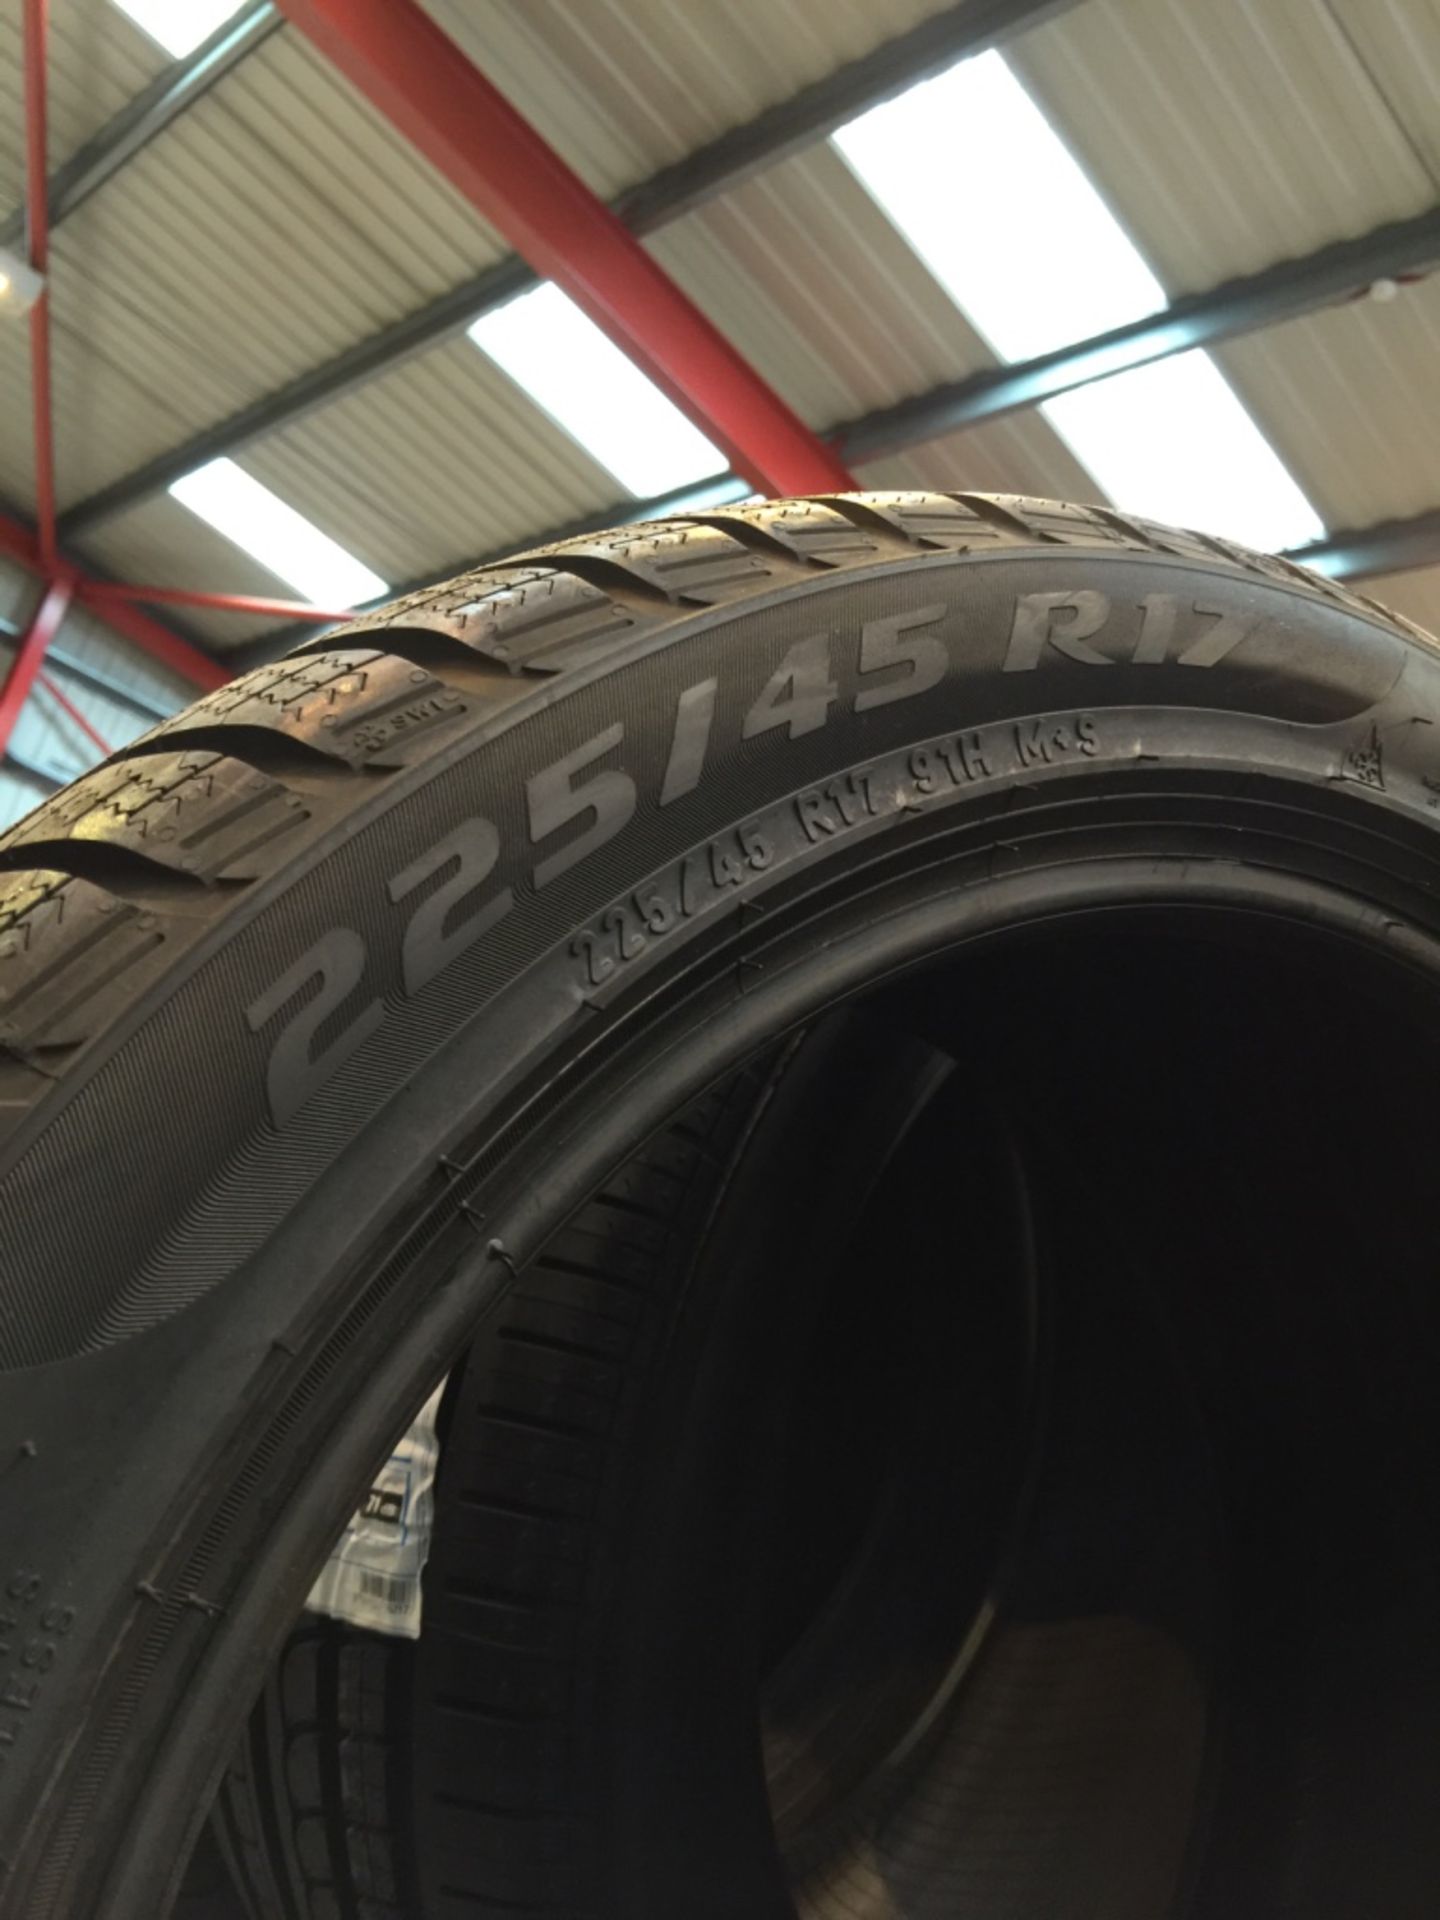 54: Pirelli Tyres Car & 4X4 - Many Large Sizes to include 18,19,21" Please see further Pictures ( - Image 25 of 55